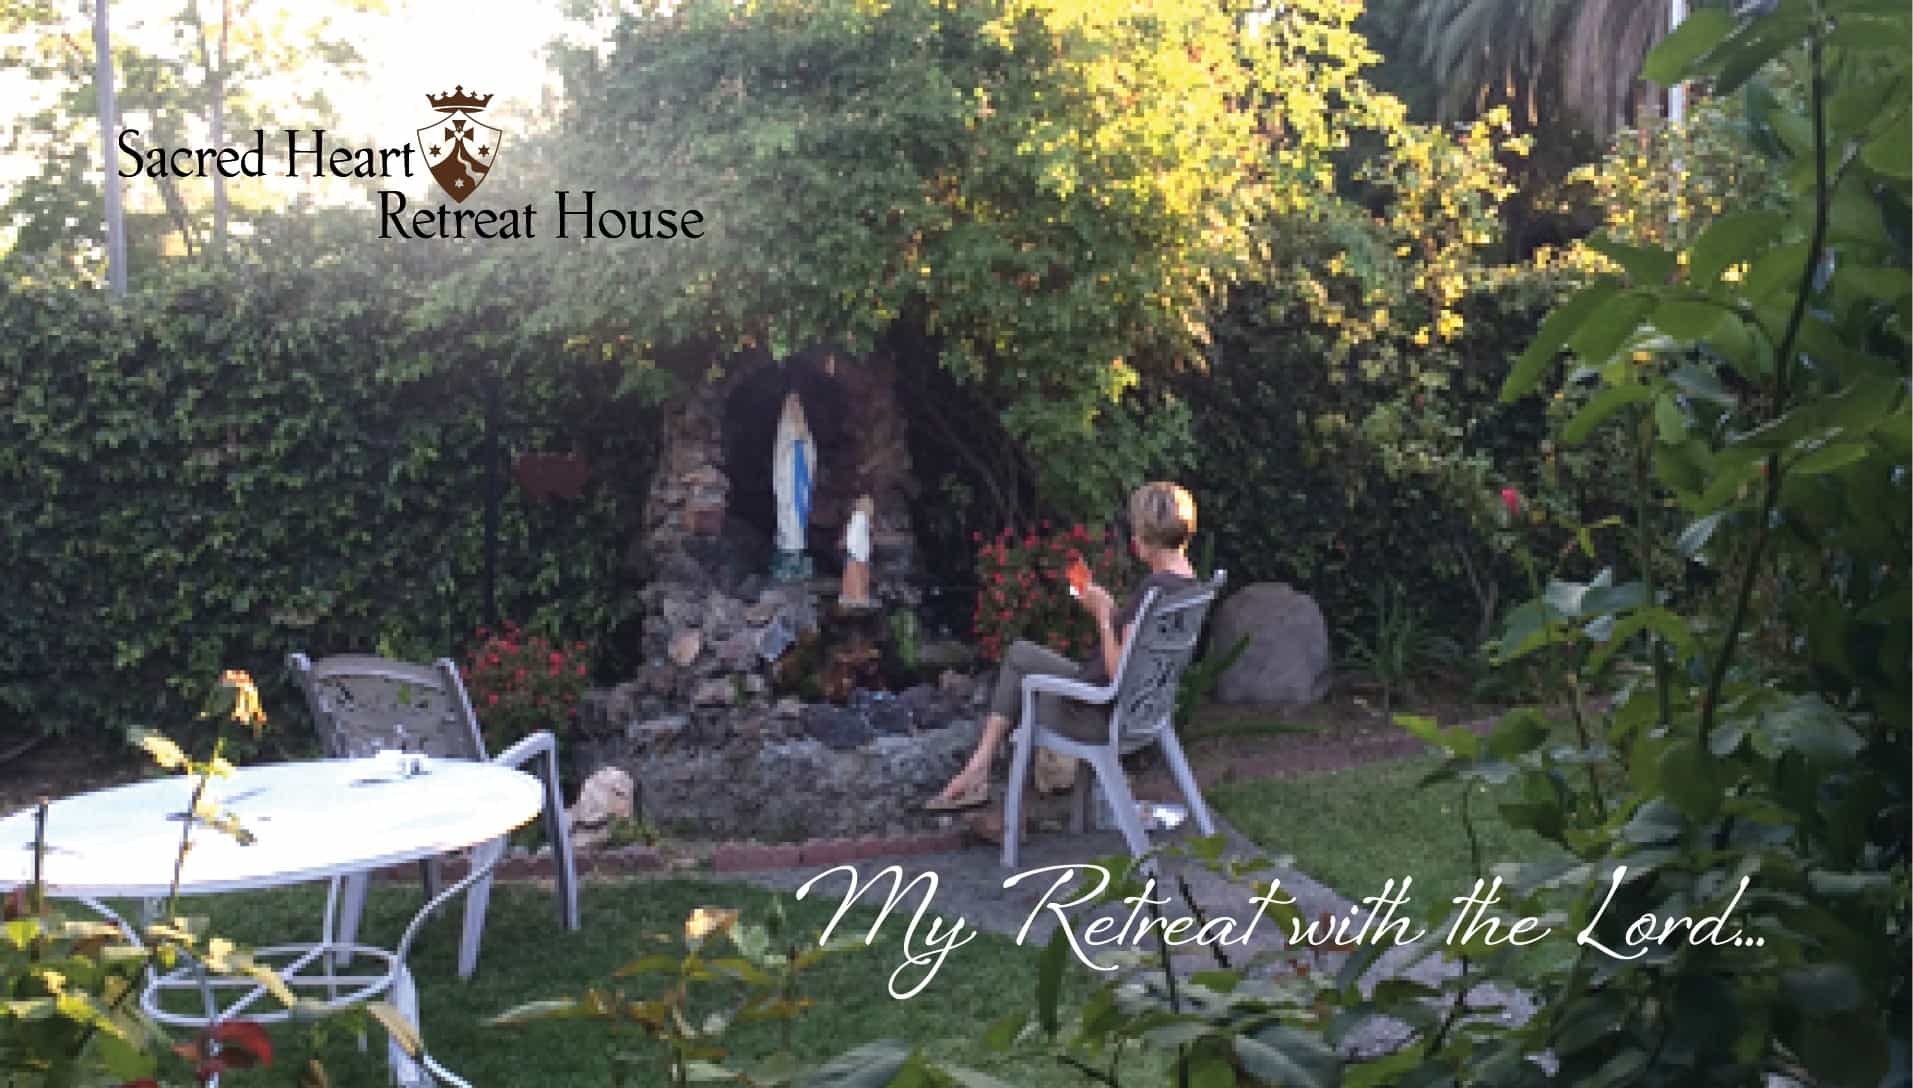 Retreatant praying in front of Mary statue, "Sacred Heart Retreat House, my retreat with the Lord"